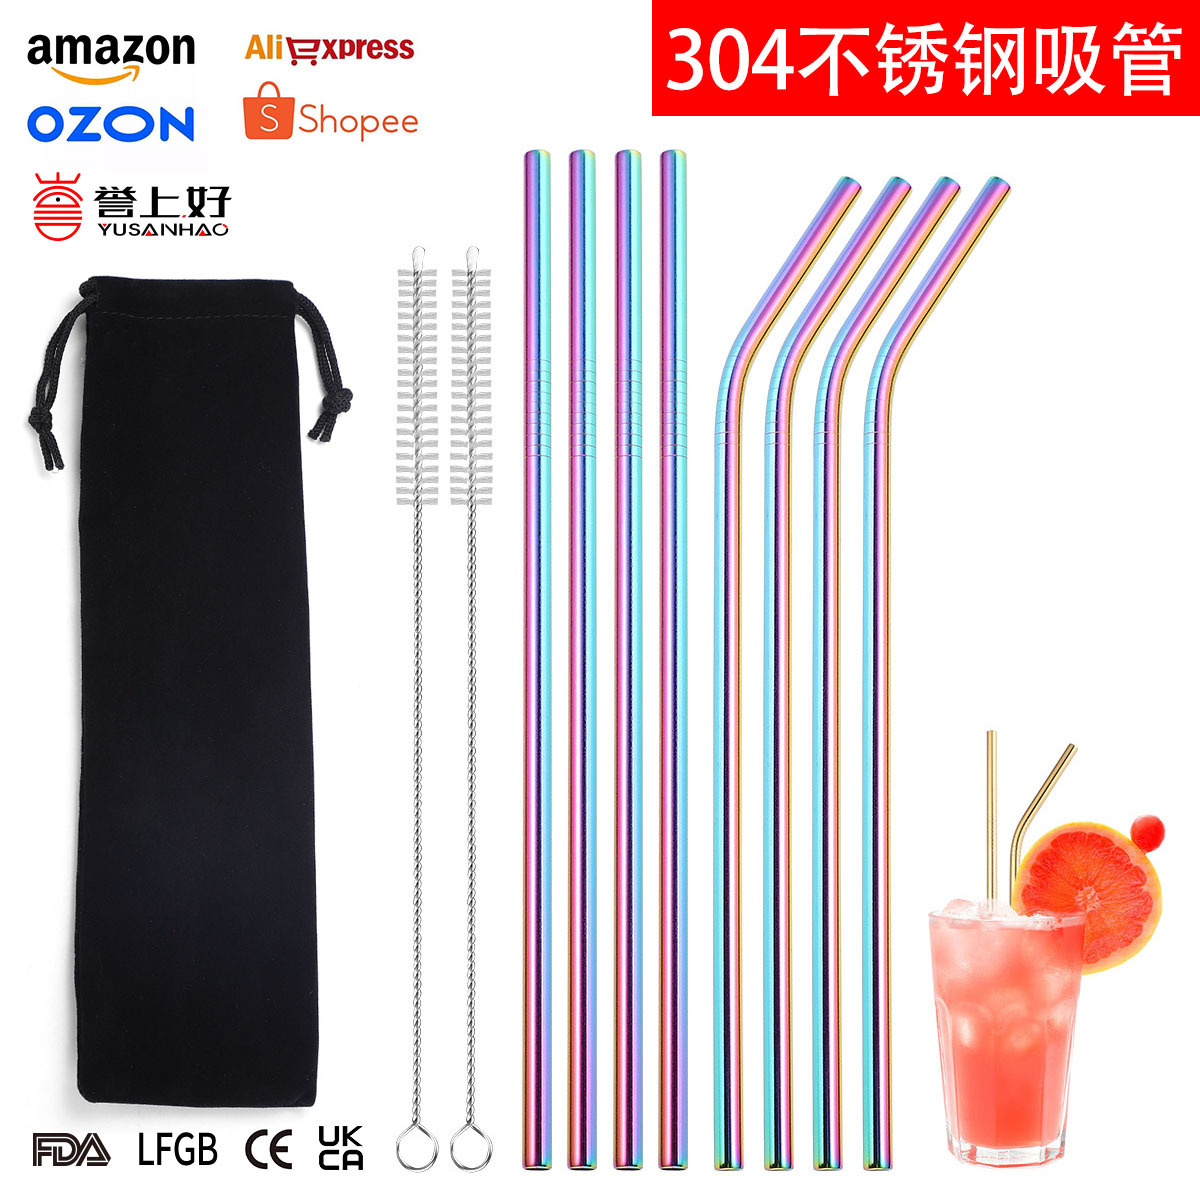  ins wind 304 stainless steel straw color food grade elbow beverage metal cup accessories brush